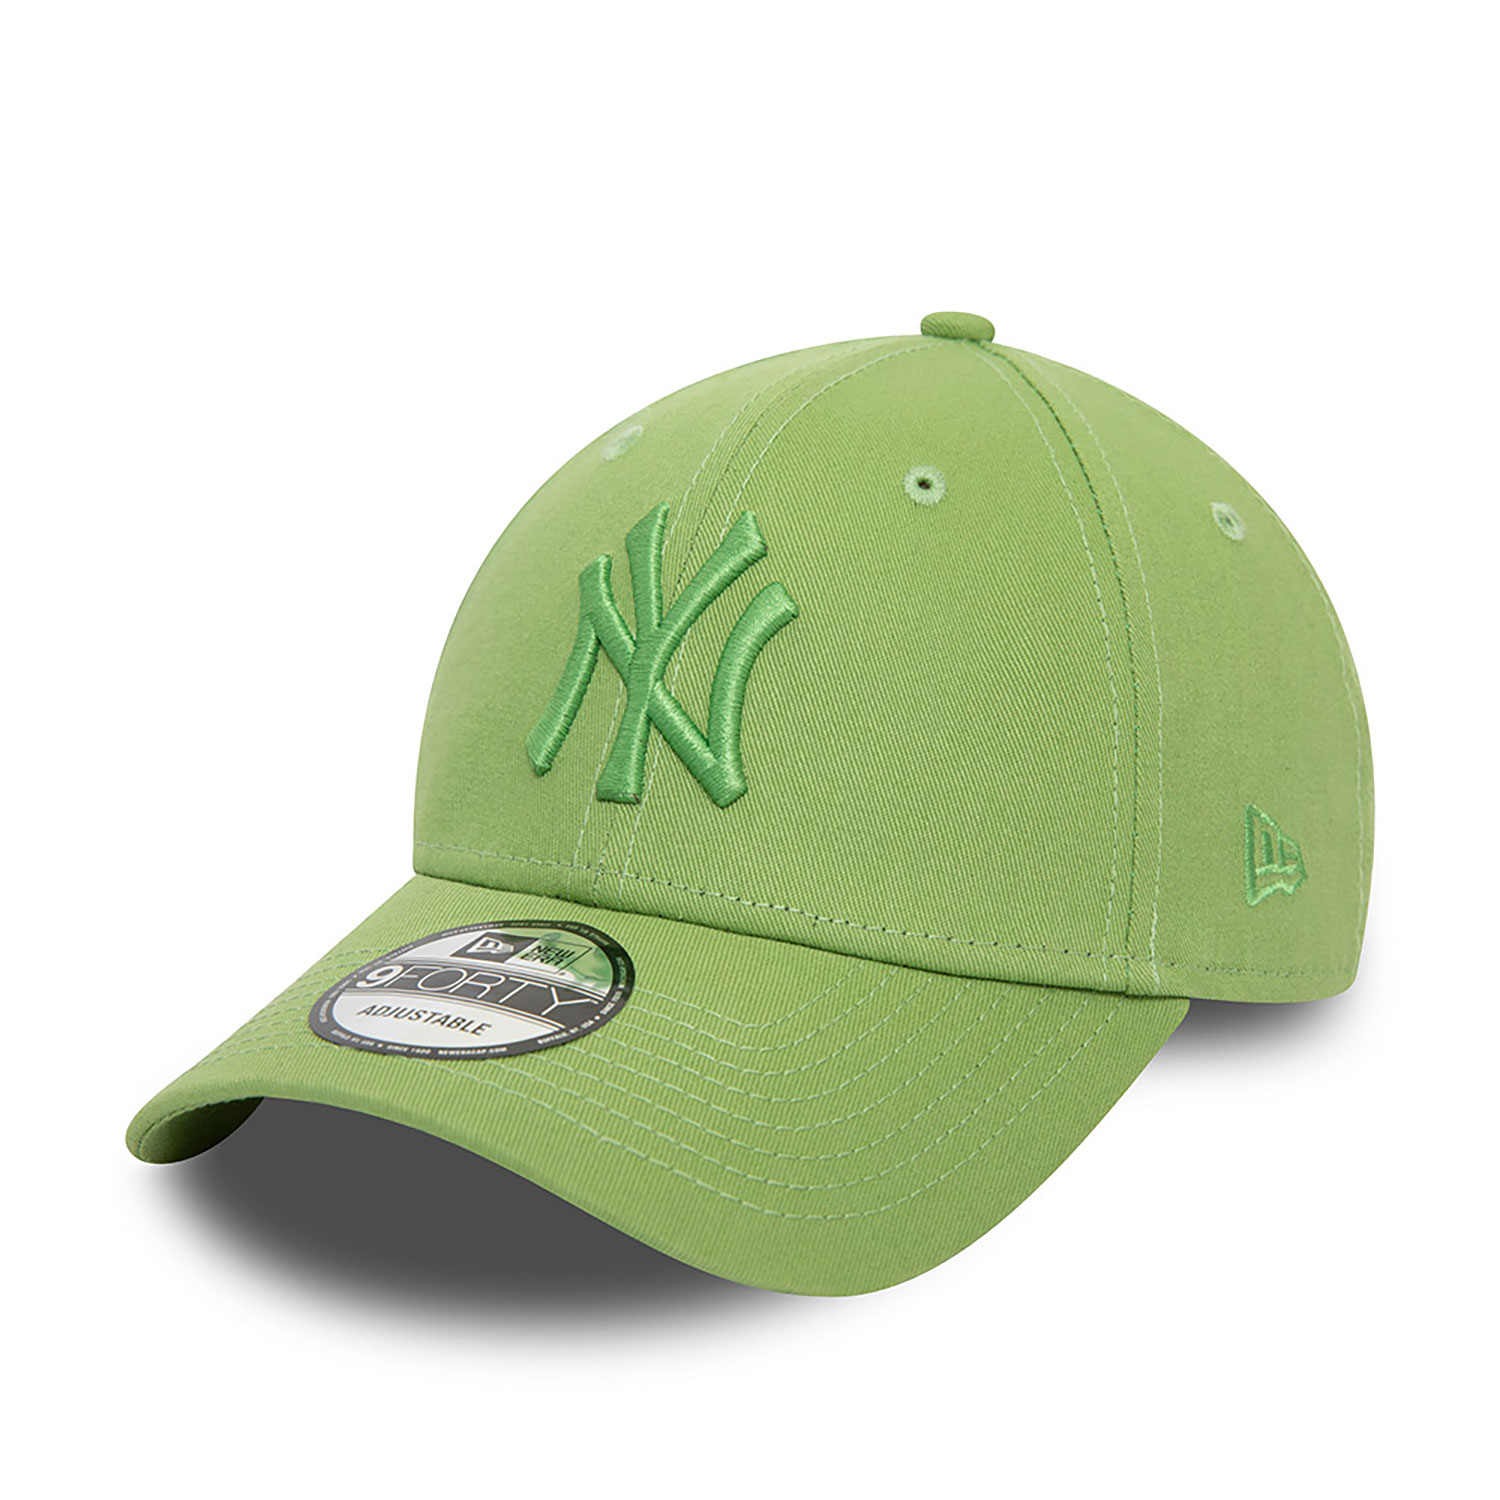 New York Yankees League Essential Green 9FORTY Adjustable Cap